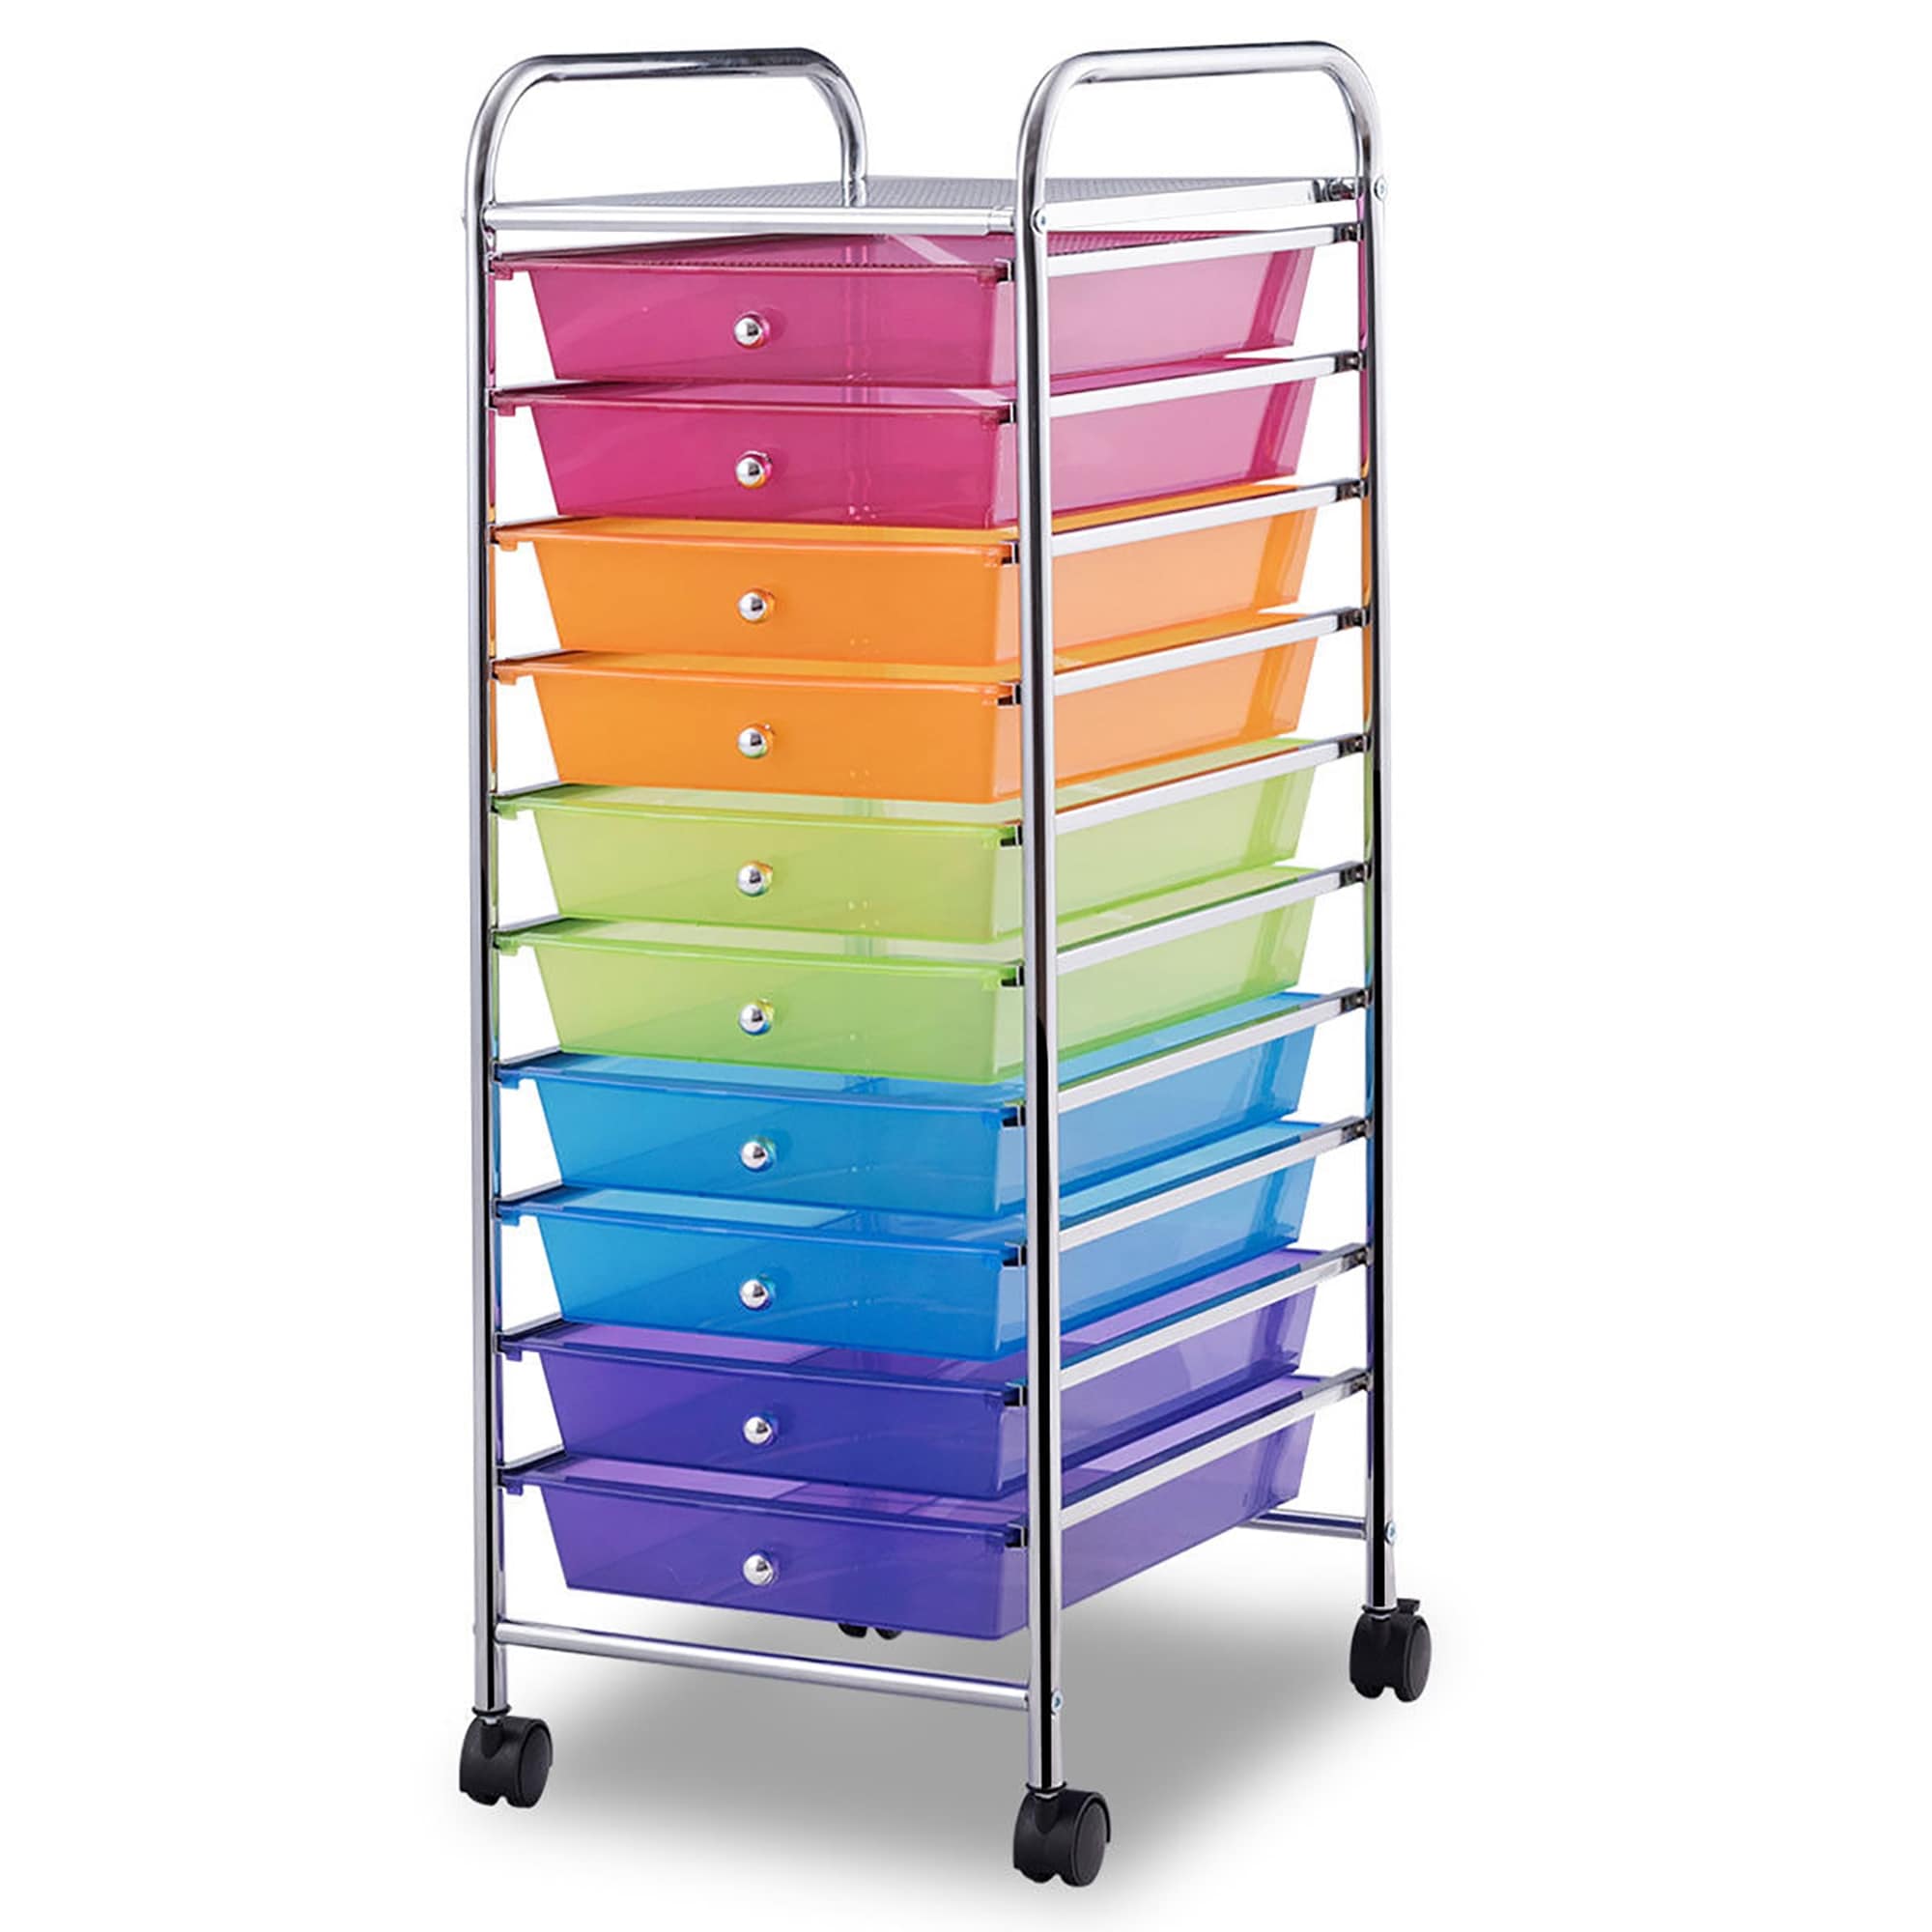 https://ak1.ostkcdn.com/images/products/is/images/direct/4769f62ba46c02602159f9998b3aa3aabf0b58b9/10-Drawer-Rolling-Cart-Utility-Organizer-with-Wheels.jpg